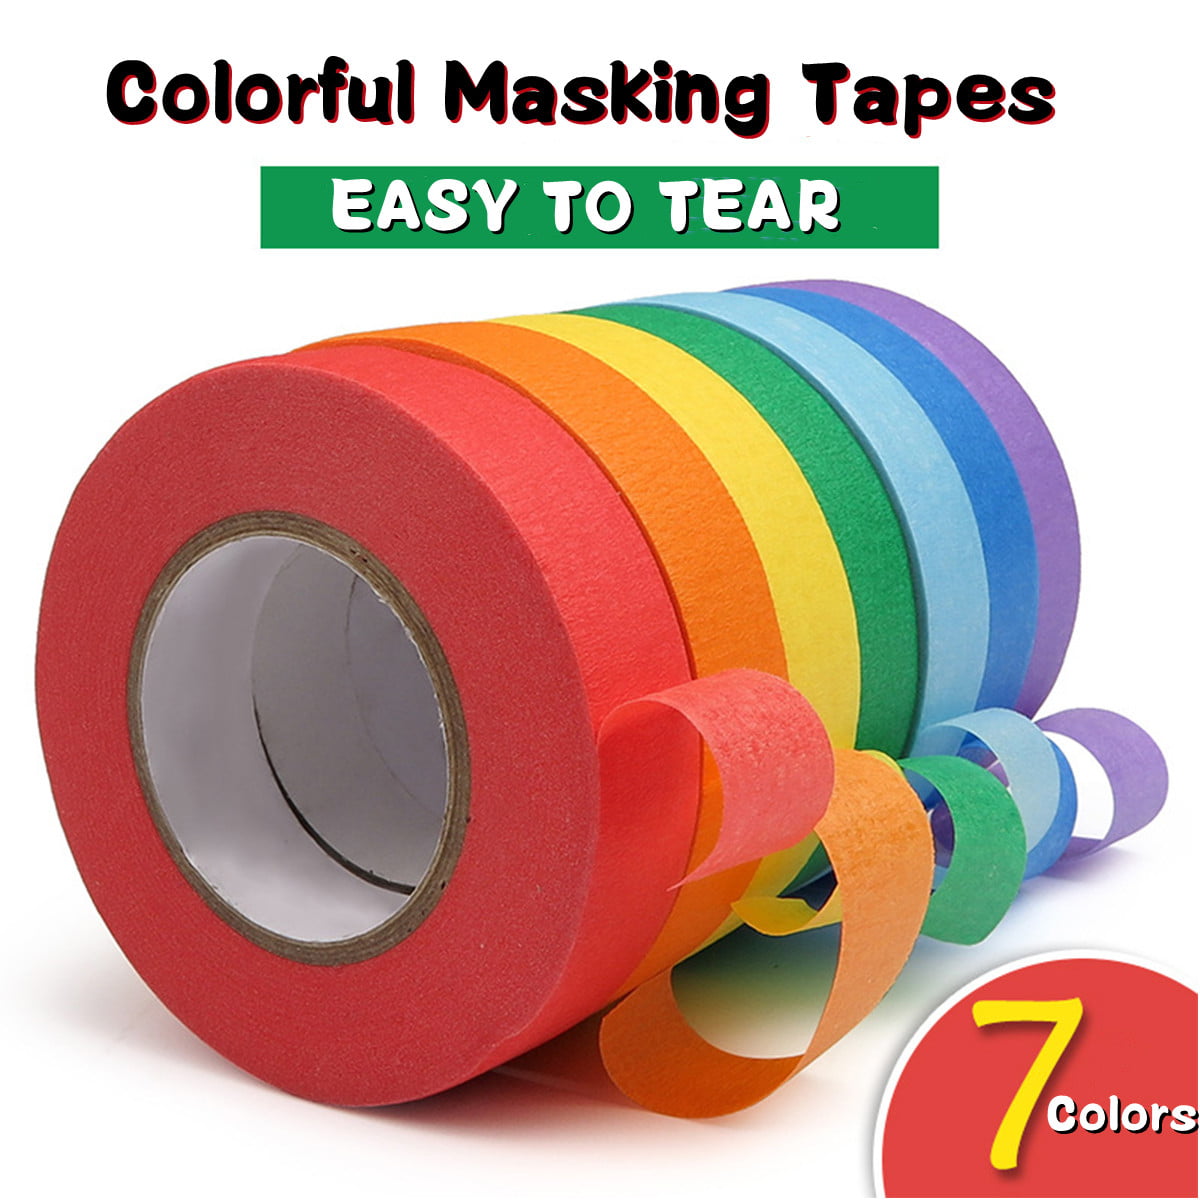 skytogether Colored Masking Tape 1 inch Wide, Rainbow Color Masking Tape Colorful Masking Tape Colored Tape Rolls for Kids Classroom Painters Tape